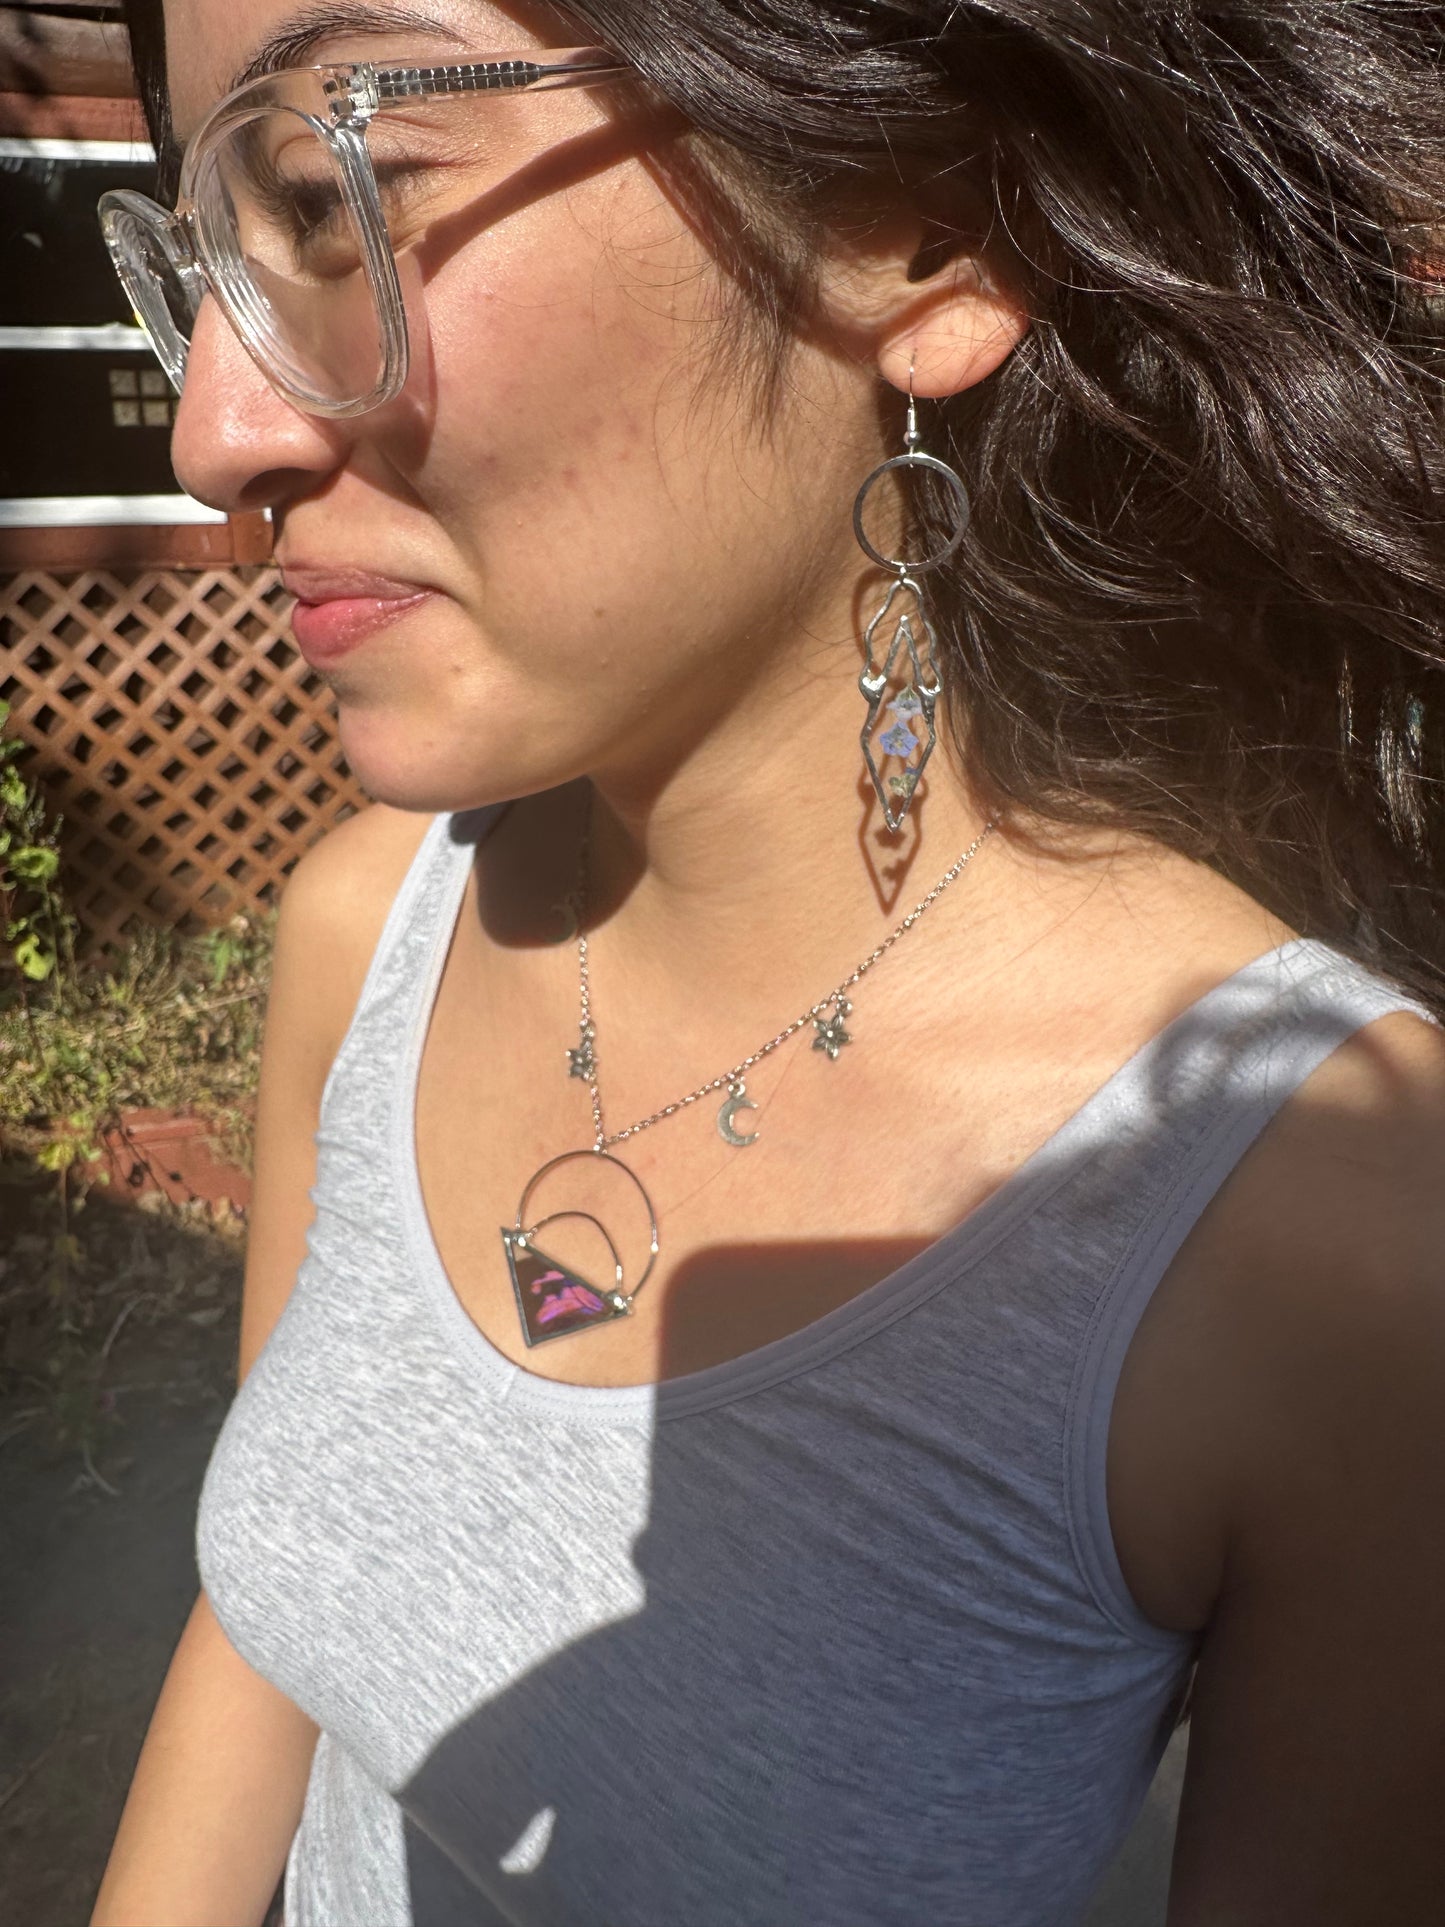 Squiggly Forget-Me-Not Earrings